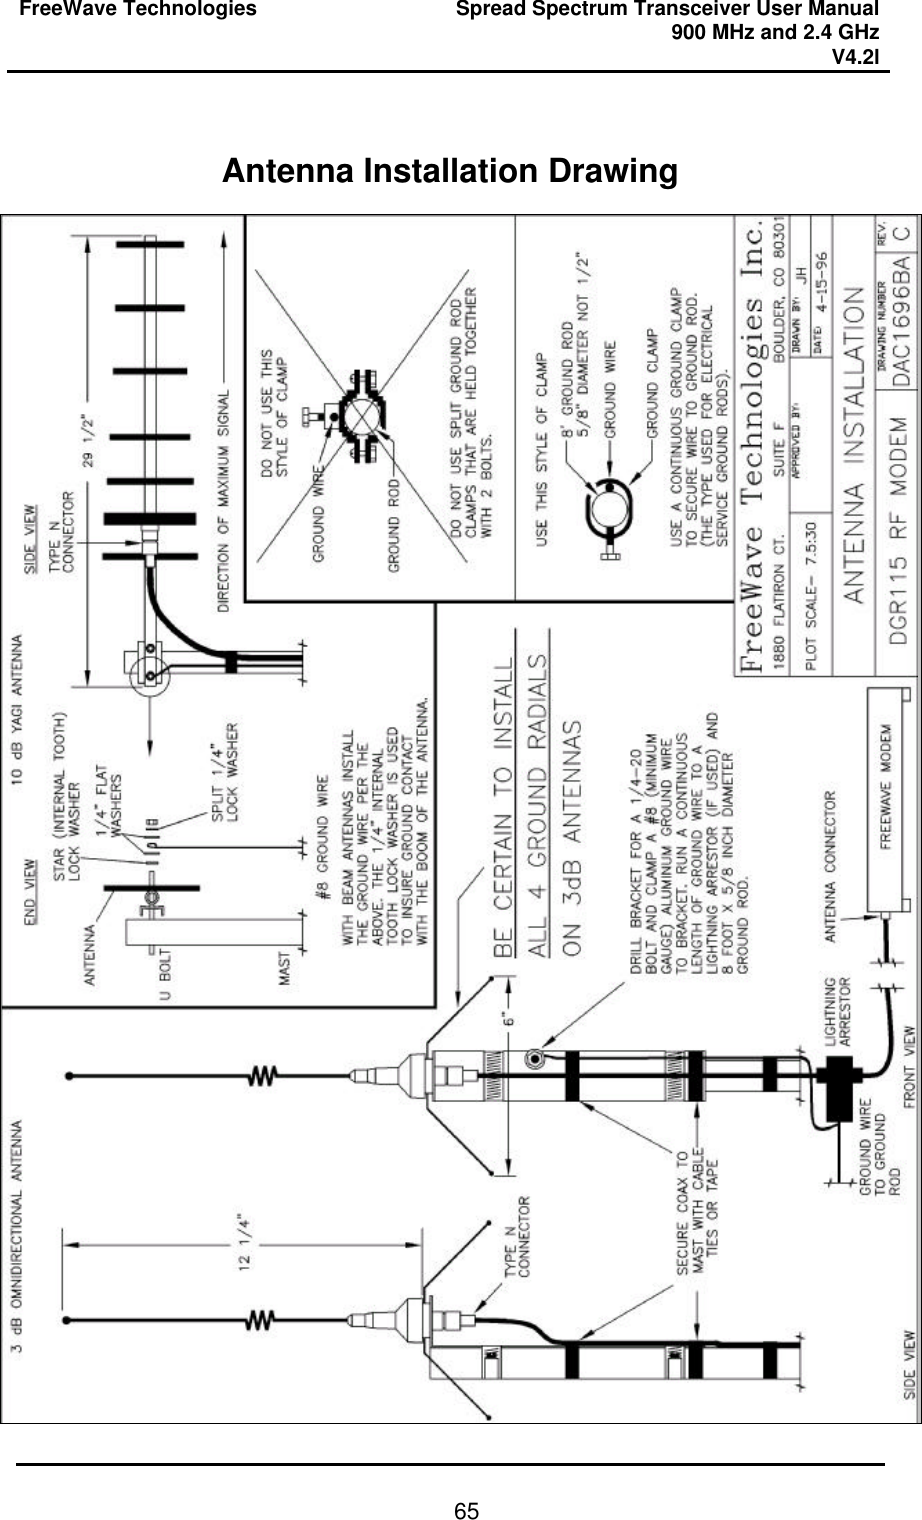 FreeWave Technologies Spread Spectrum Transceiver User Manual 900 MHz and 2.4 GHz V4.2l   65 Antenna Installation Drawing   